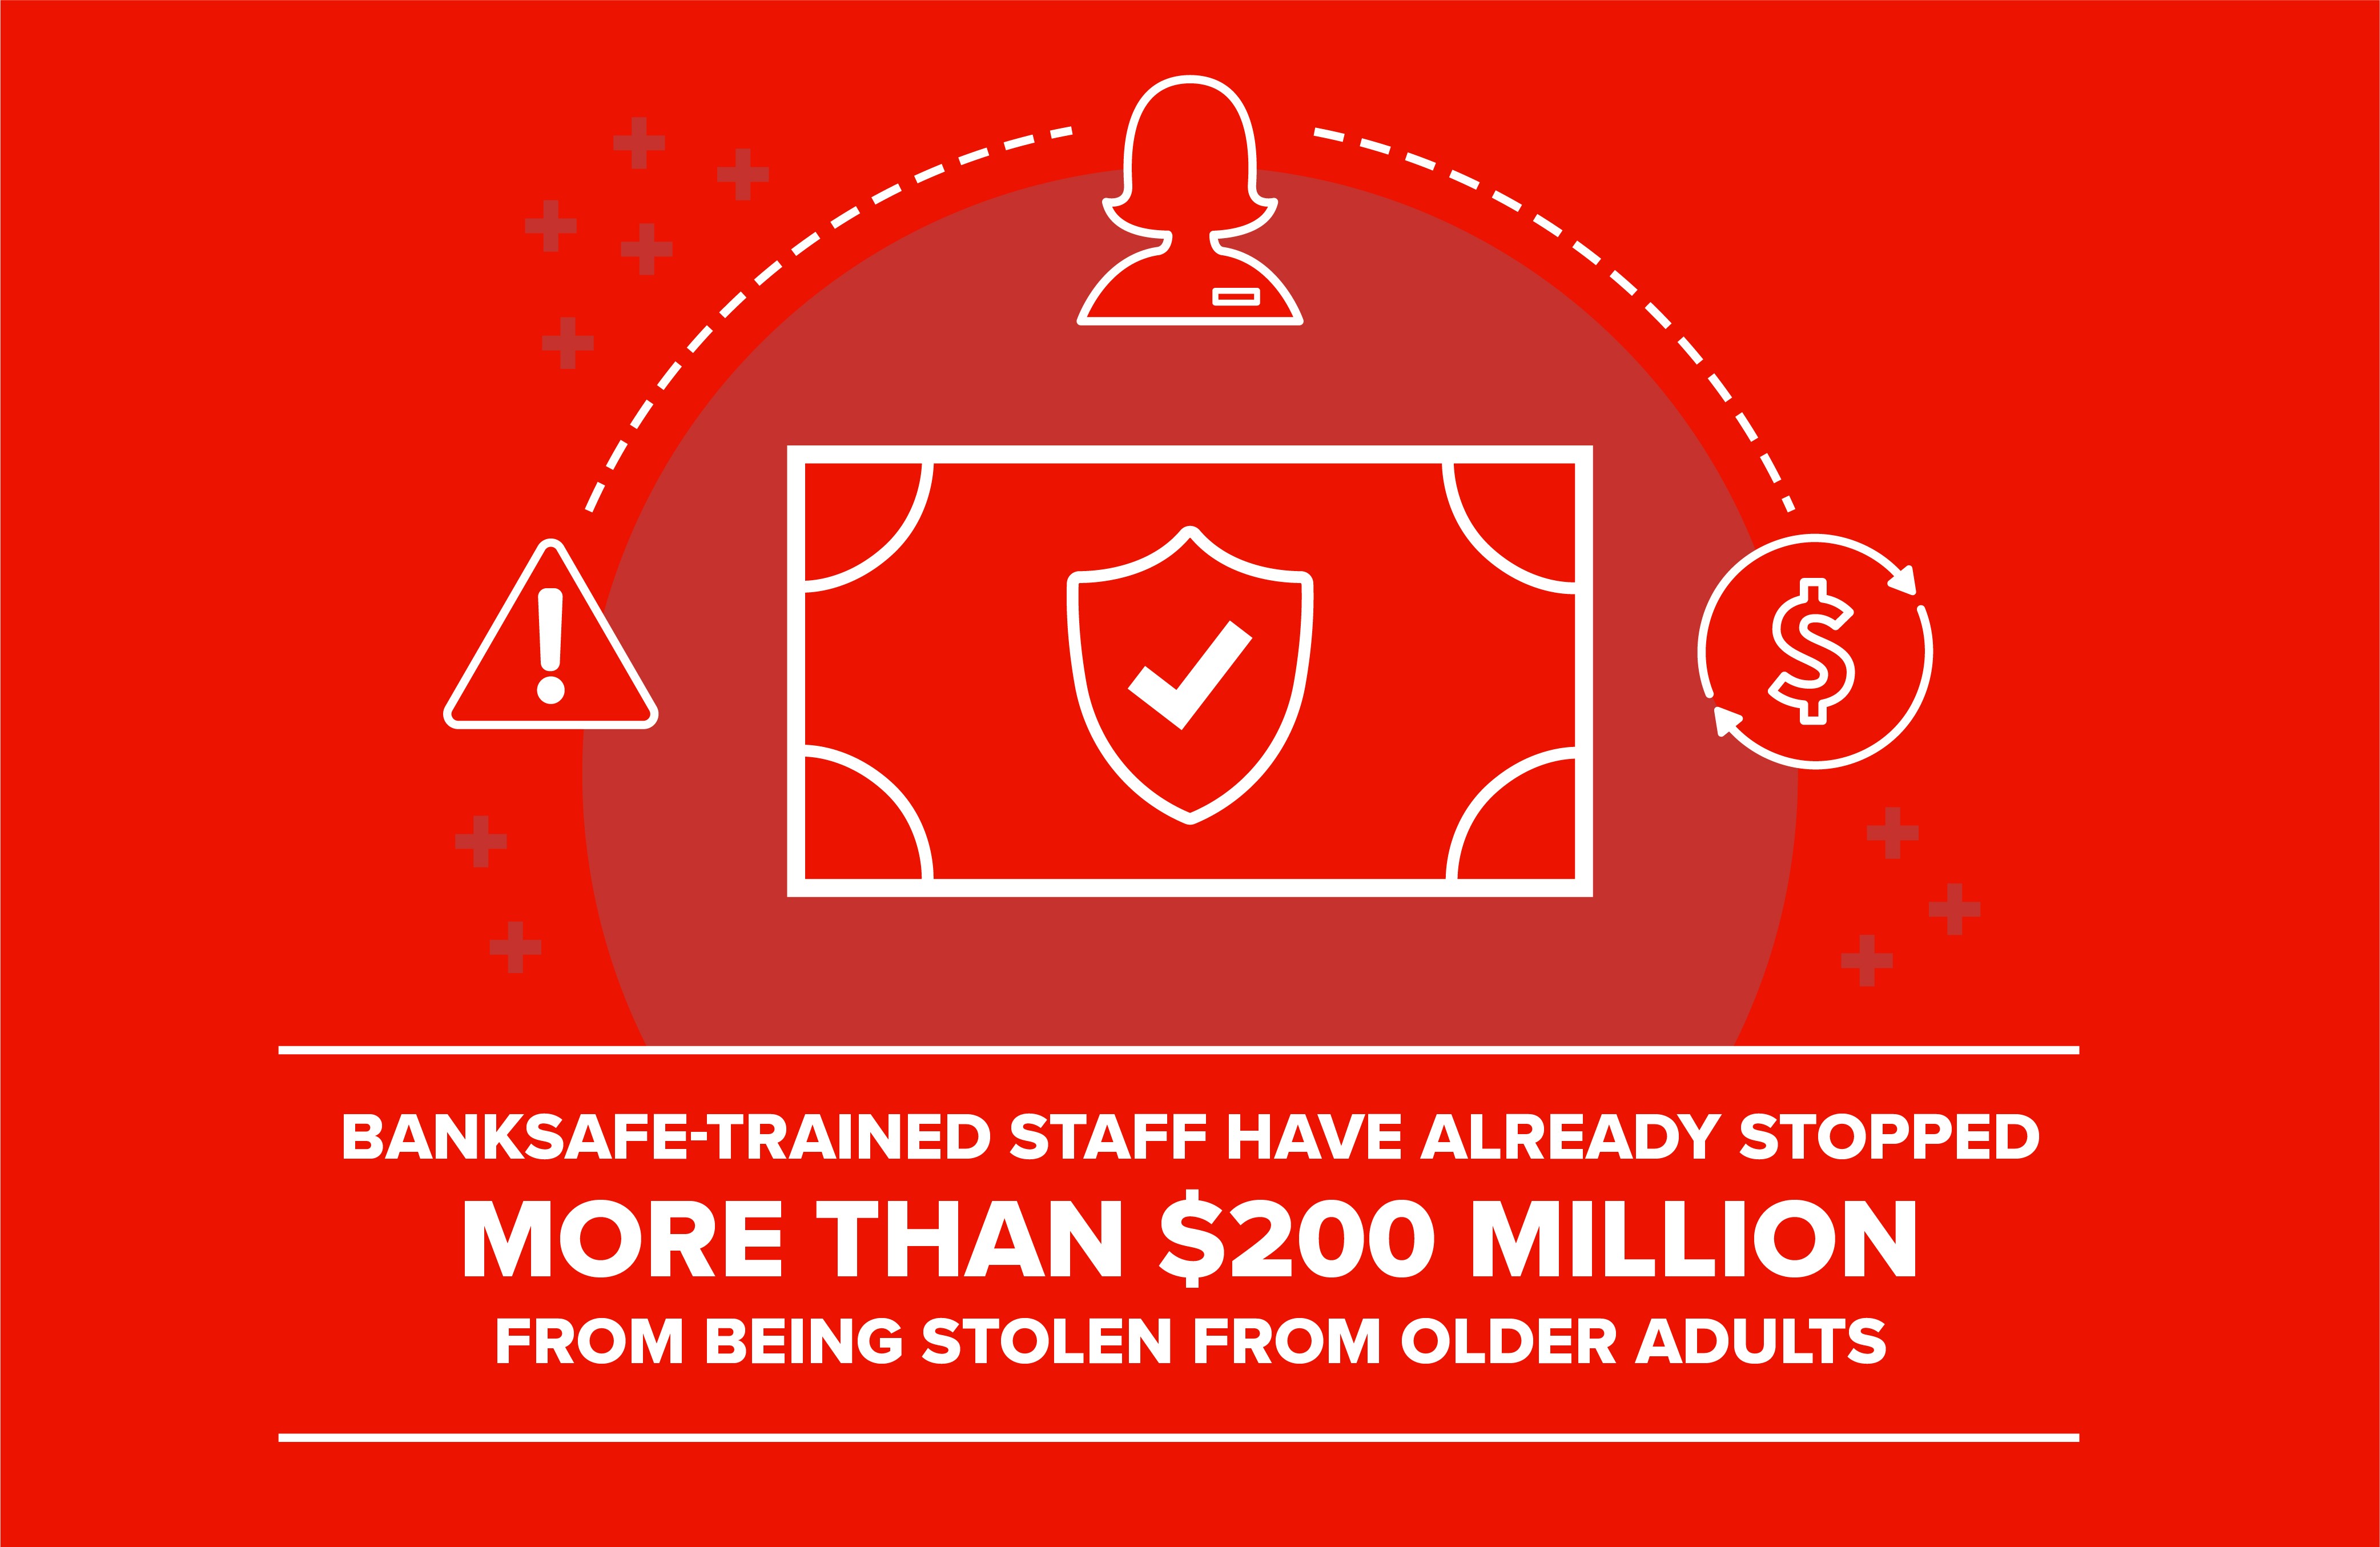 graphic illustration of a bank note with scam and fraud icons text says banksafe-trained staff have already stopped more than $200 million from being stolen from older adults.